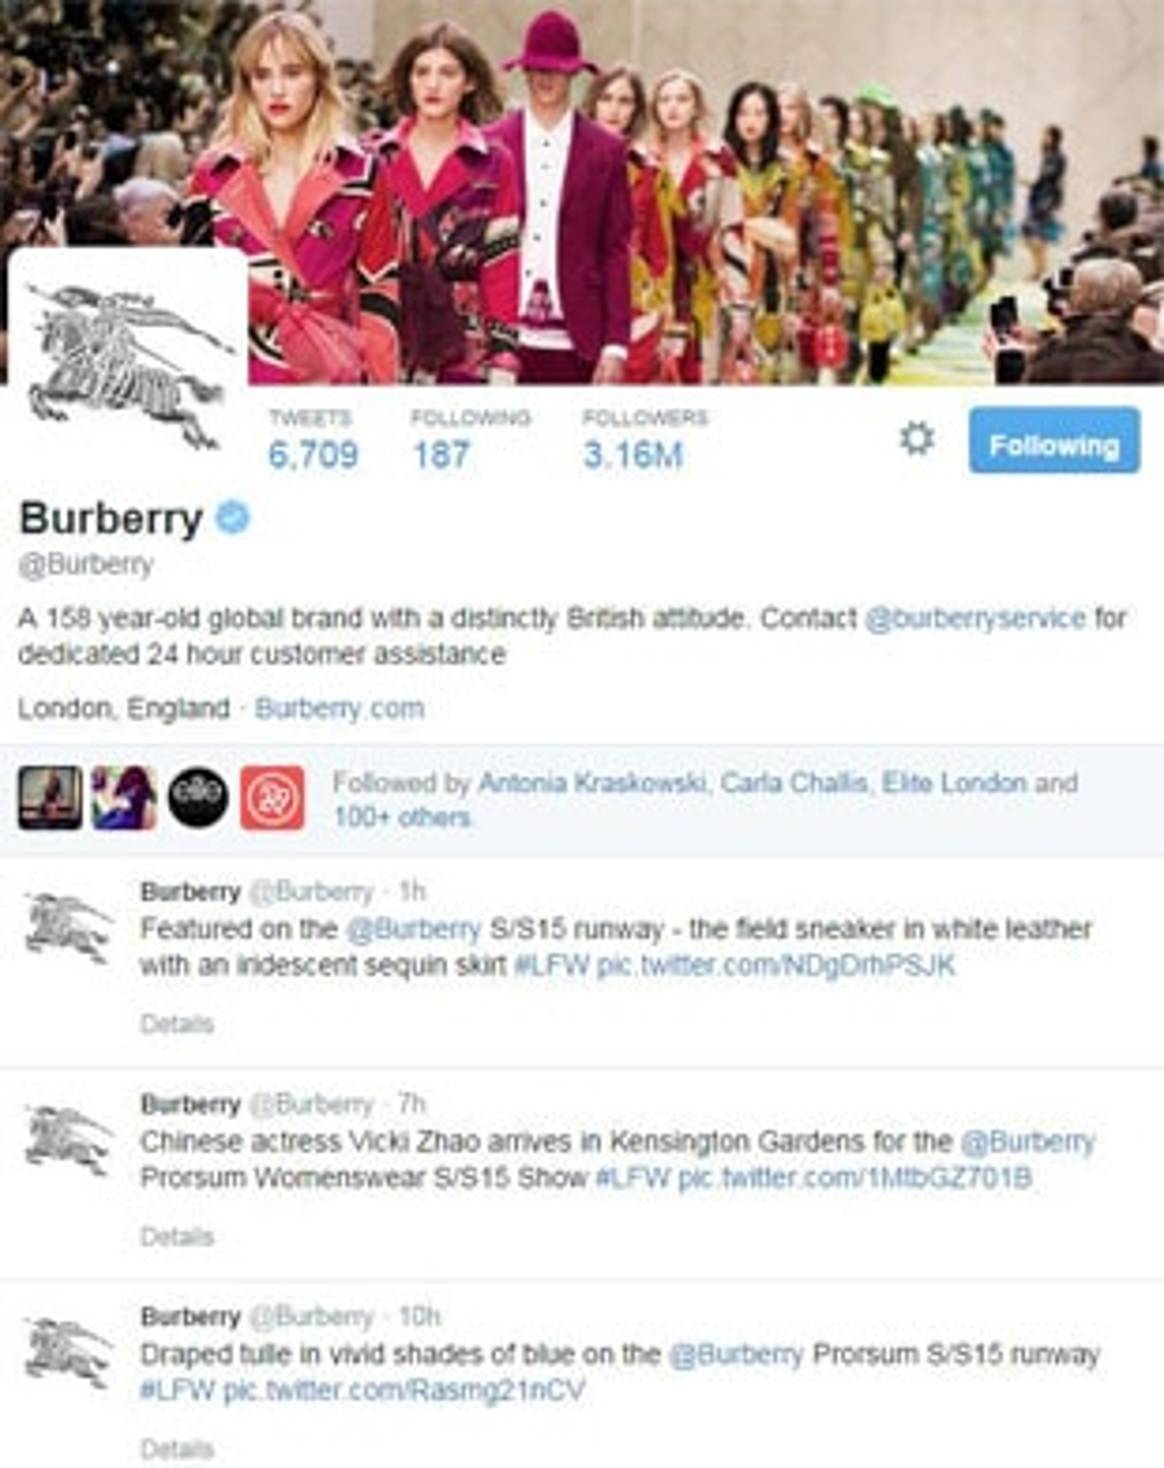 Burberry, Topshop and Tom Ford most tweeted LFW designers